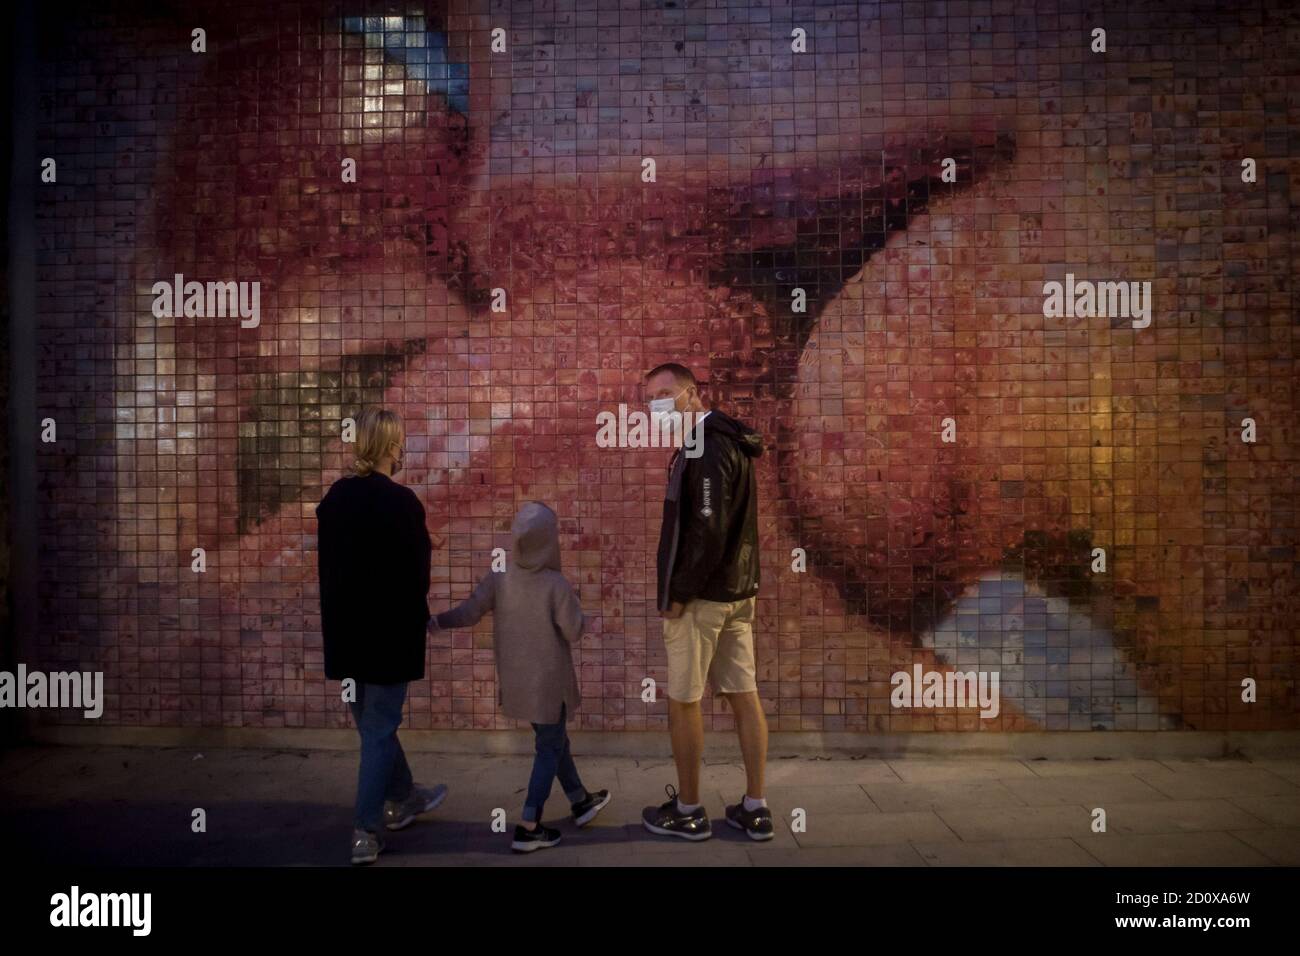 Barcelona, Spain. October 3, 2020, Barcelona, Catalonia, Spain: In Barcelona a family wearing face masks to prevent the spread of coronavirus looks at a work of street art made of small photos that together form a kiss. Signs of a second wave of Covid-19 infections breaking over Spain have made to impose new partial lockdown on its capital Madrid. Credit:Jordi Boixareu/Alamy Live News Stock Photo